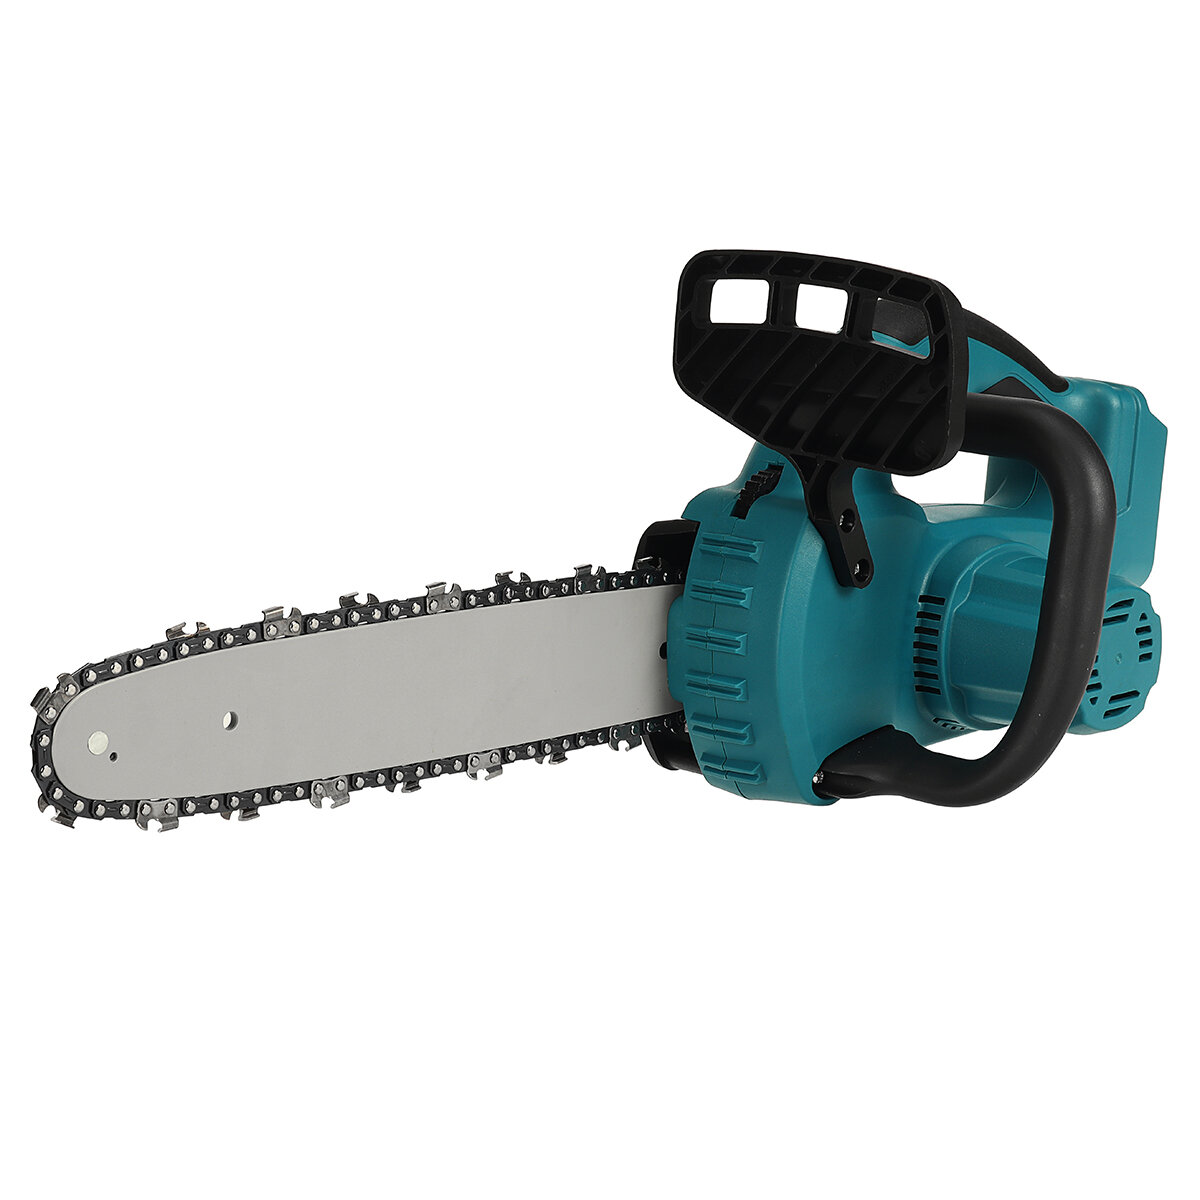 Image of VIOLEWORKS 388VF 5000W 12 Inch Portable Electric Chain Saw Pruning Chain Saw Rechargeable Woodworking Power Tools Wood C